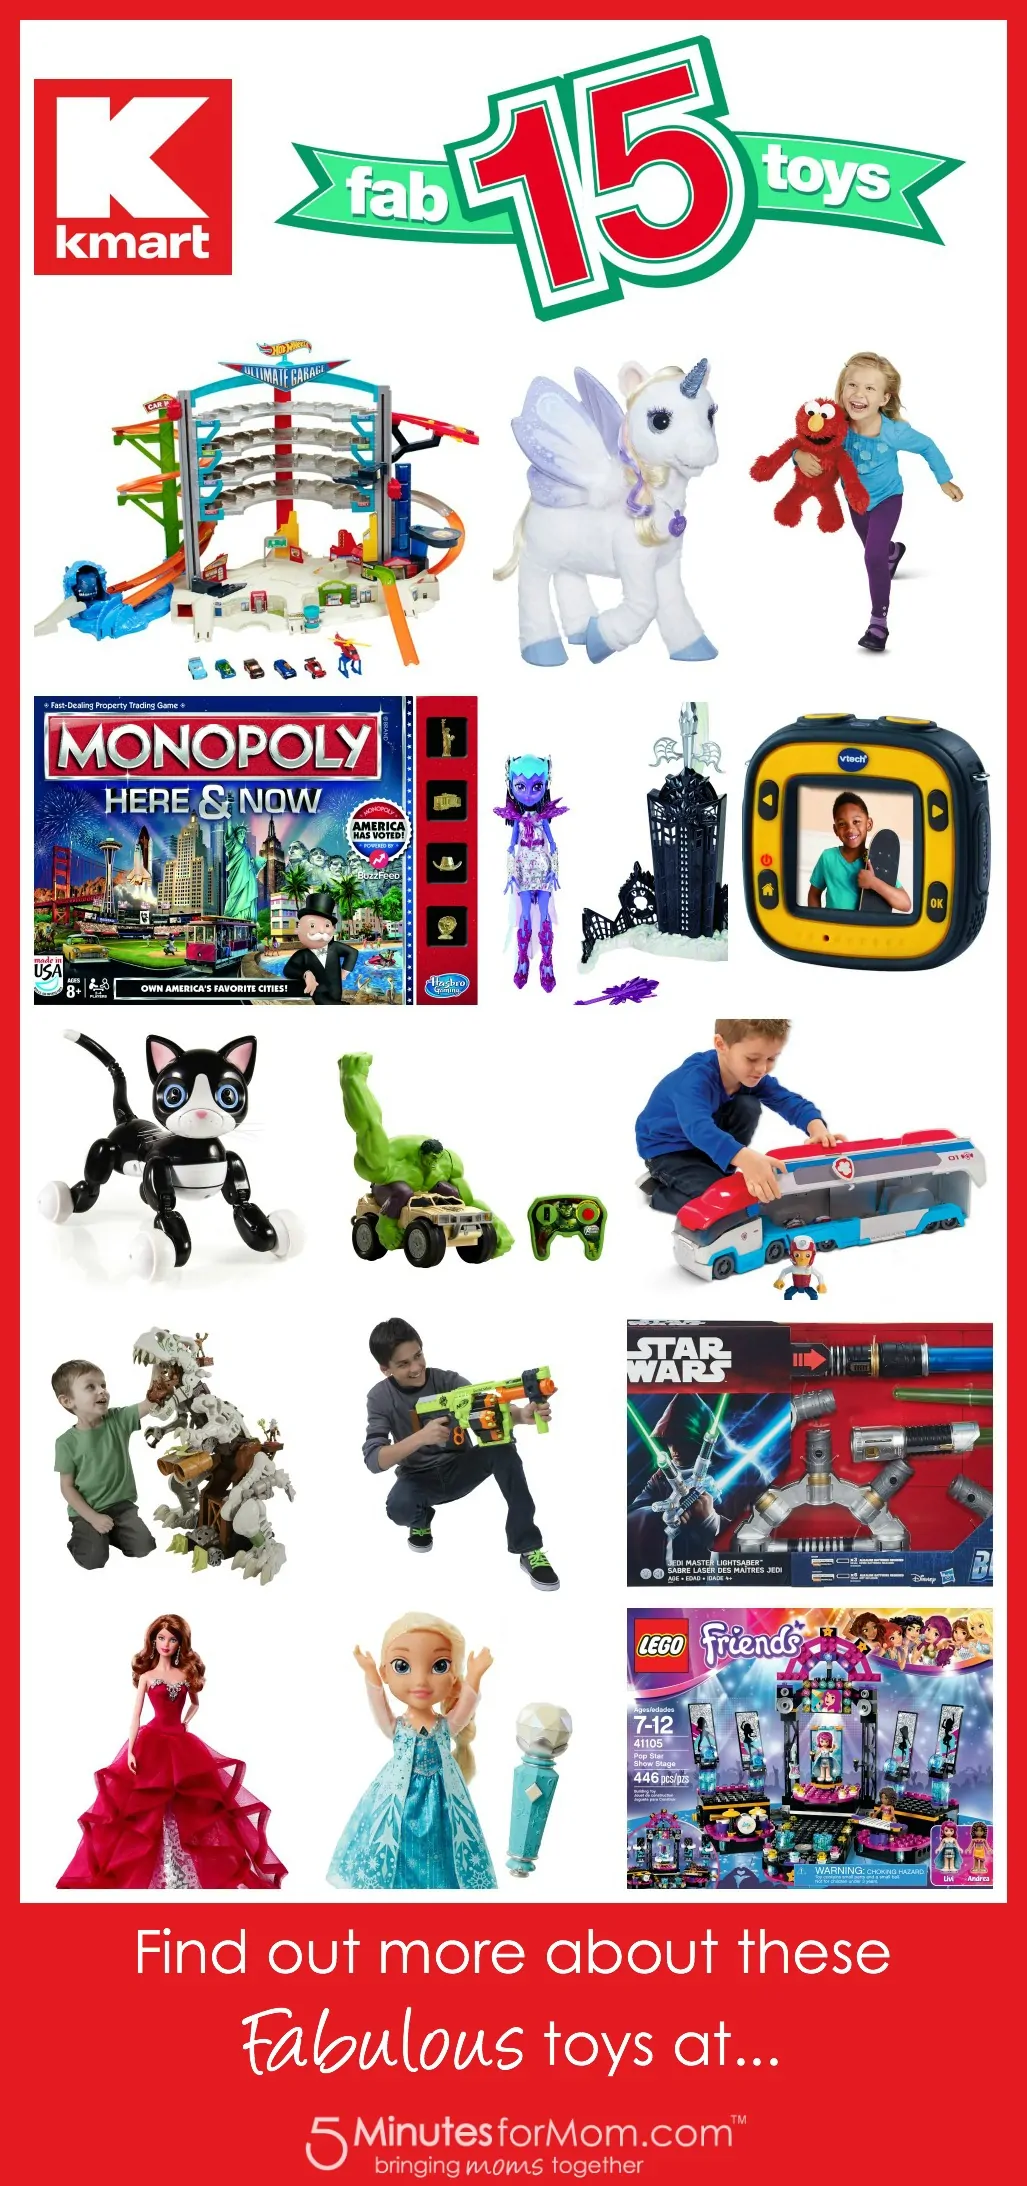 Fab15 Toys - Reviewed at 5 Minutes for Mom